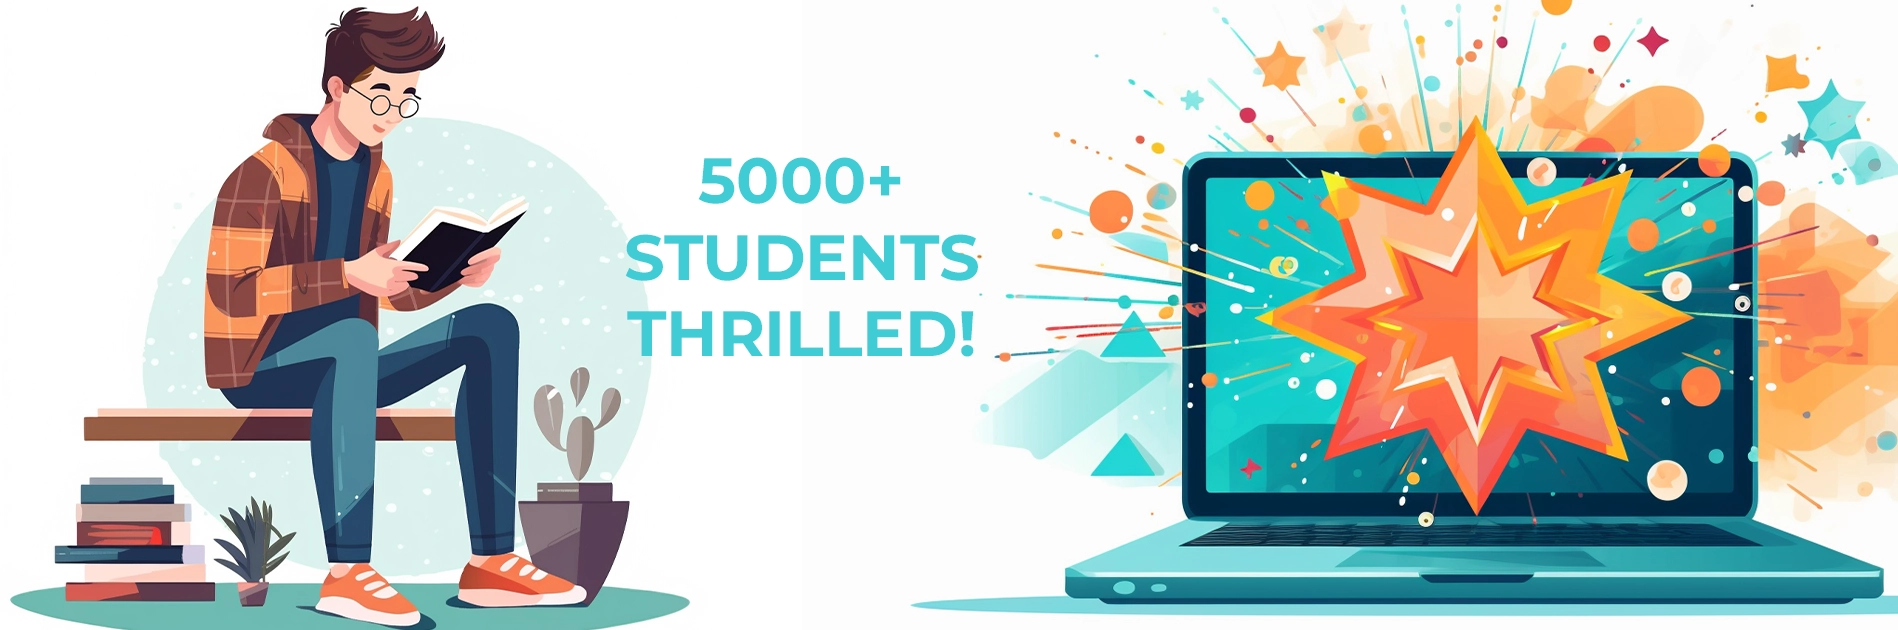 Over 5000 Statistics Students Are Happy with Our Statistics Coursework Help